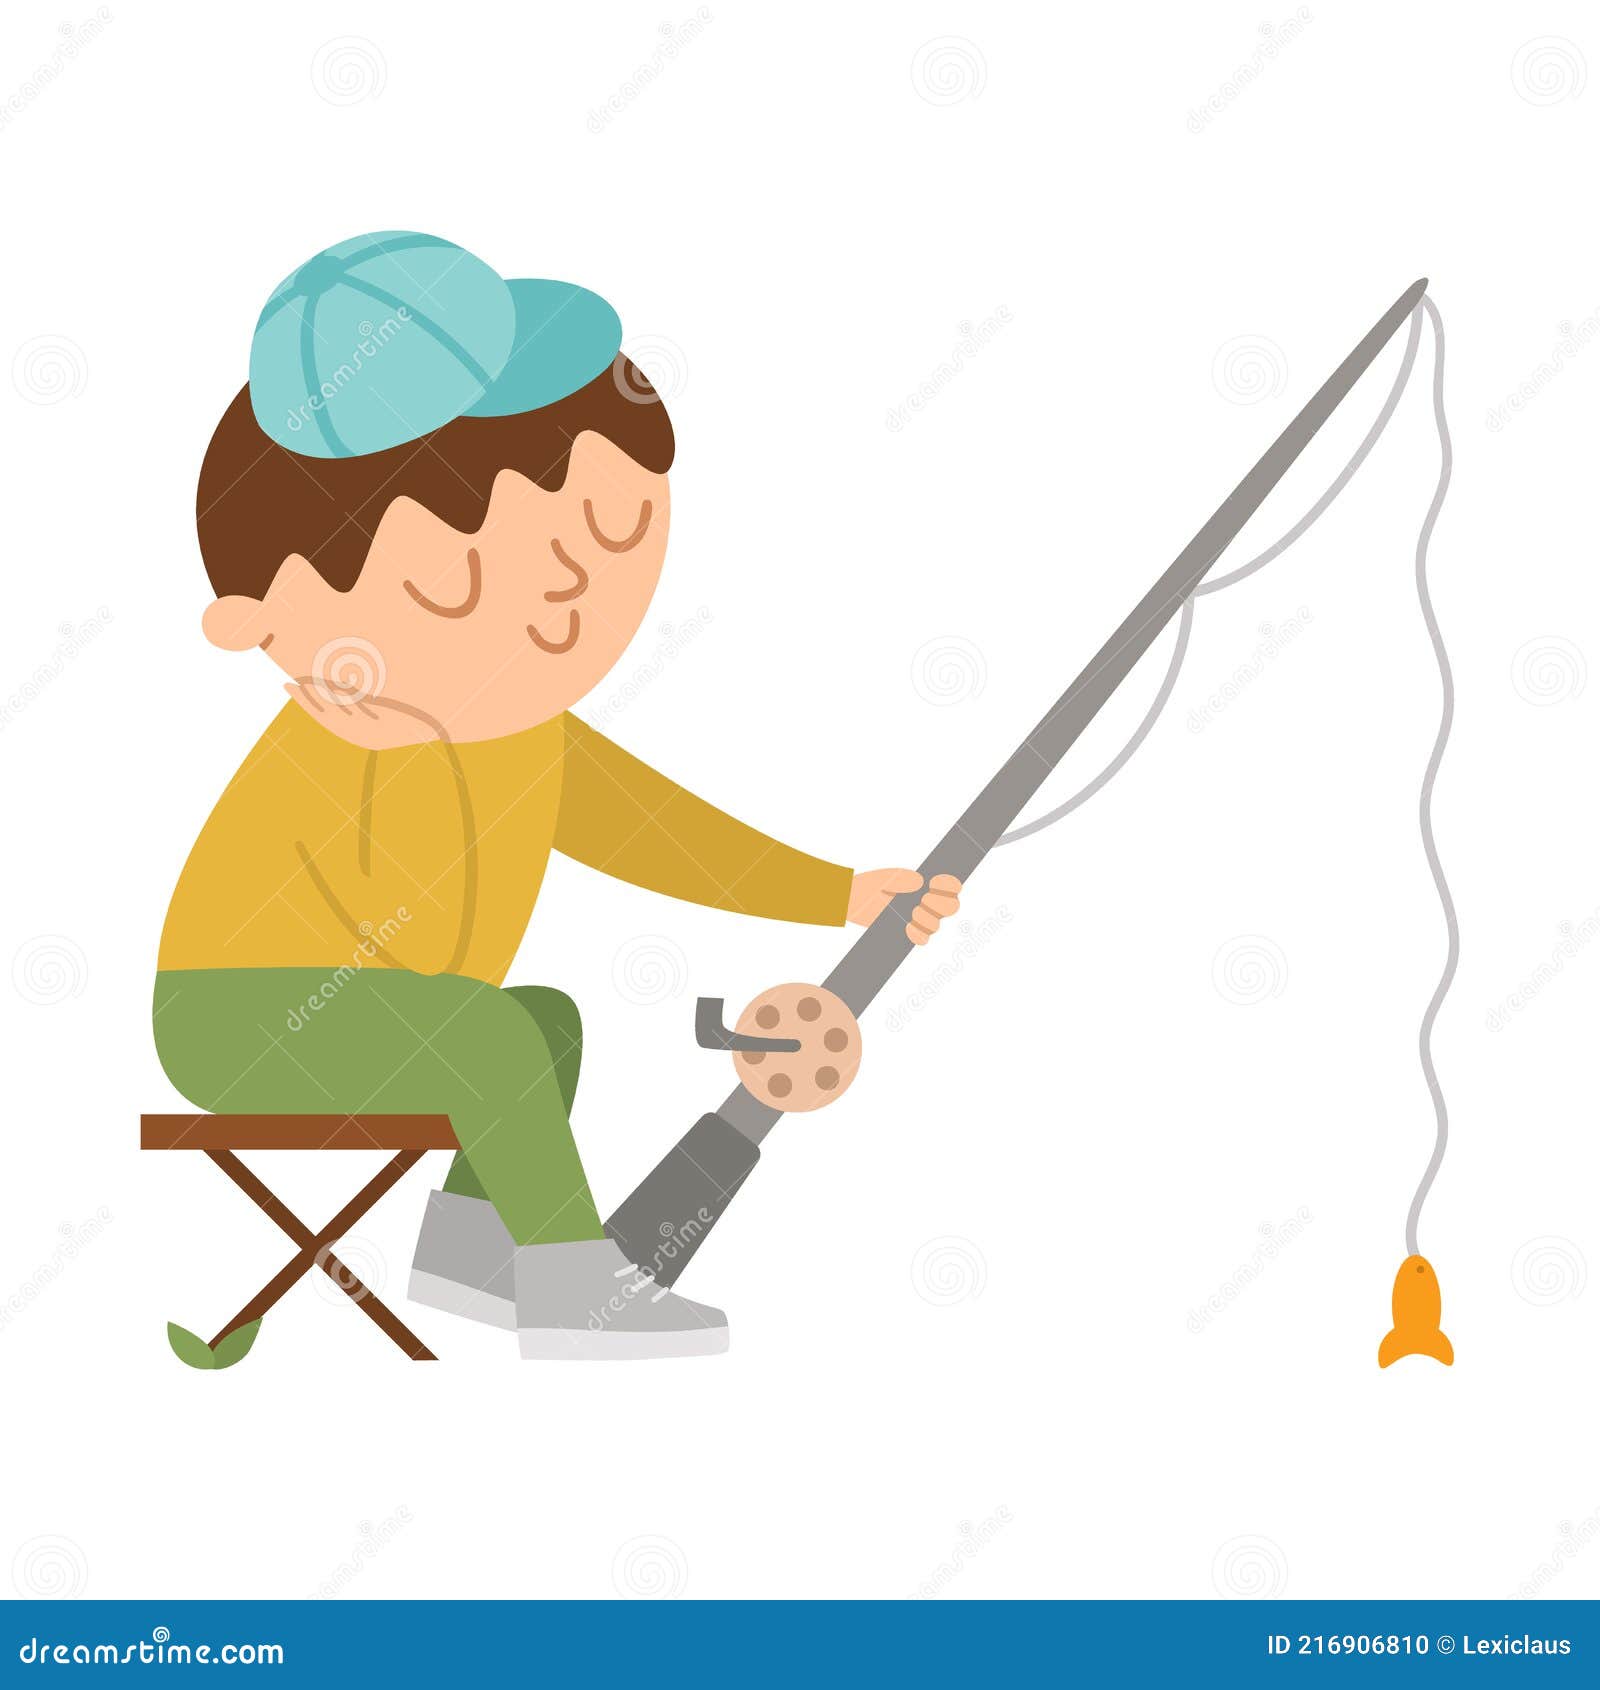 Vector Cute Boy Sitting on a Folding Chair and Fishing. Campfire